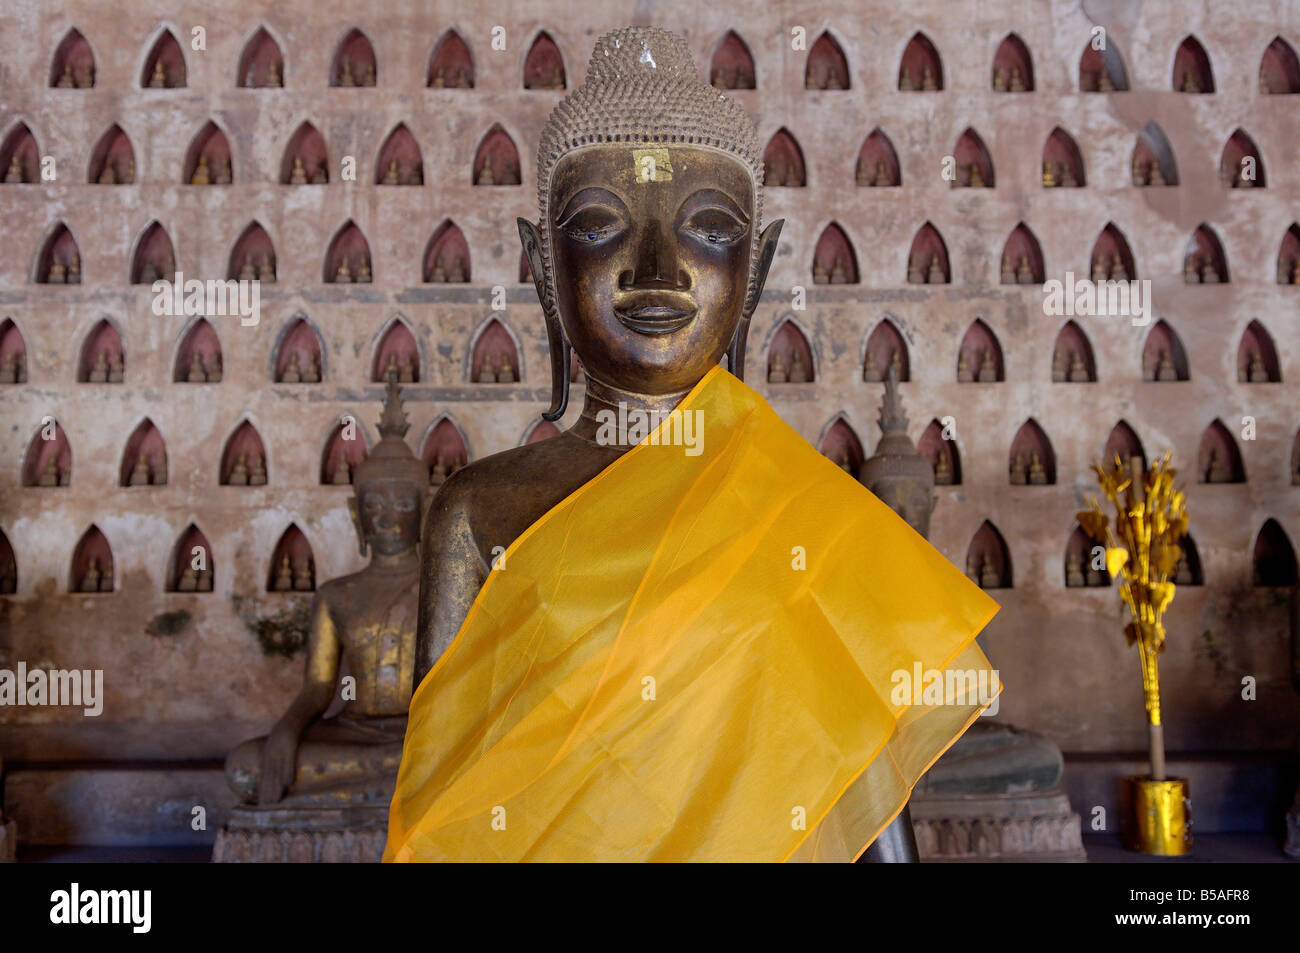 Buddha statue in the gallery or cloister surrounding the Sim, Wat Sisaket, Vientiane, Laos, Indochina, Southeast Asia Stock Photo